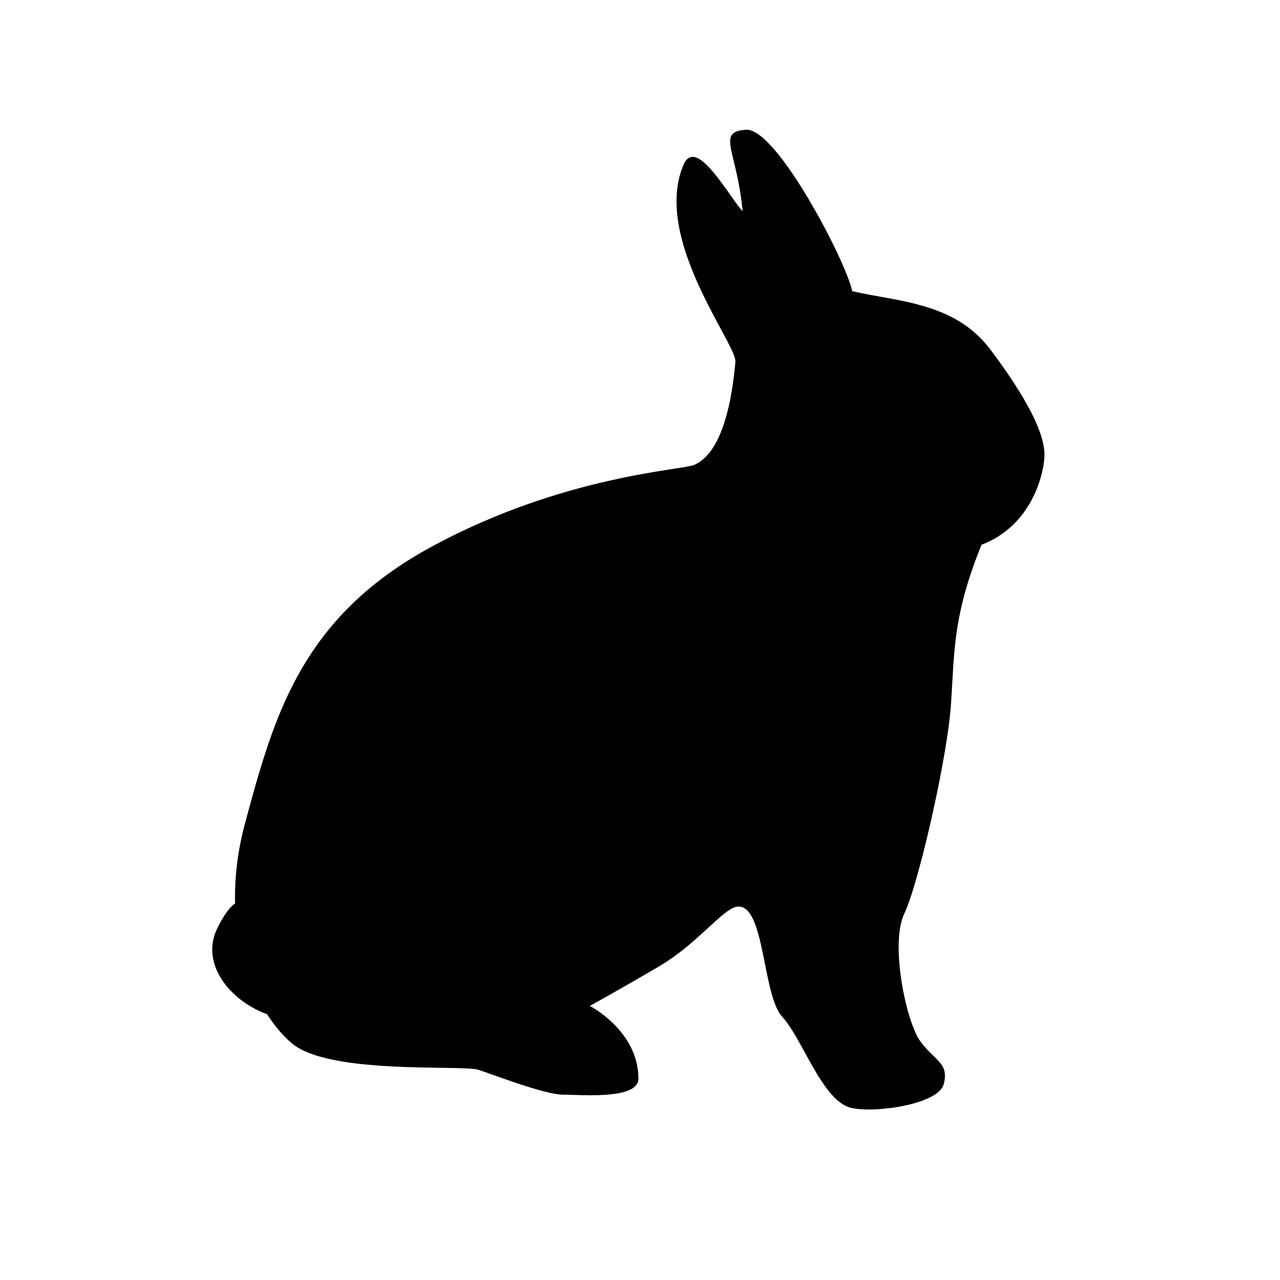 Bunny Silhouette Logo - File:Rabbit silhouette - erect ears - facing right.png - Wikimedia ...